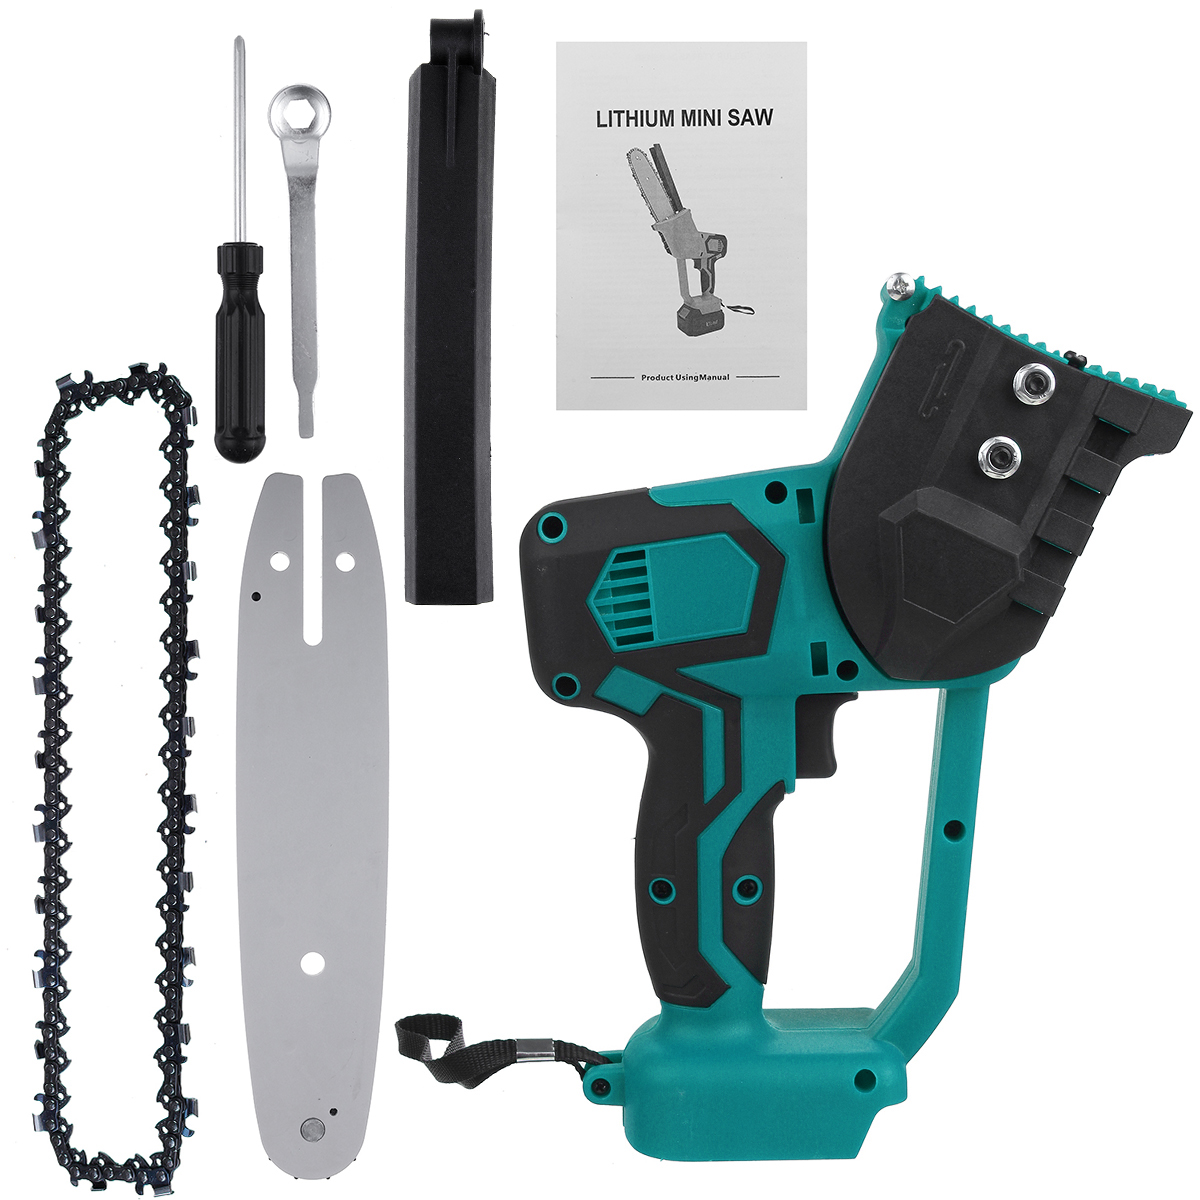 Kiwarm-8-Inch-Cordless-Electric-Chain-Saw-One-Hand-Saw-Woodworking-Cutter-for-Makita-1821V-Battery-1804678-8